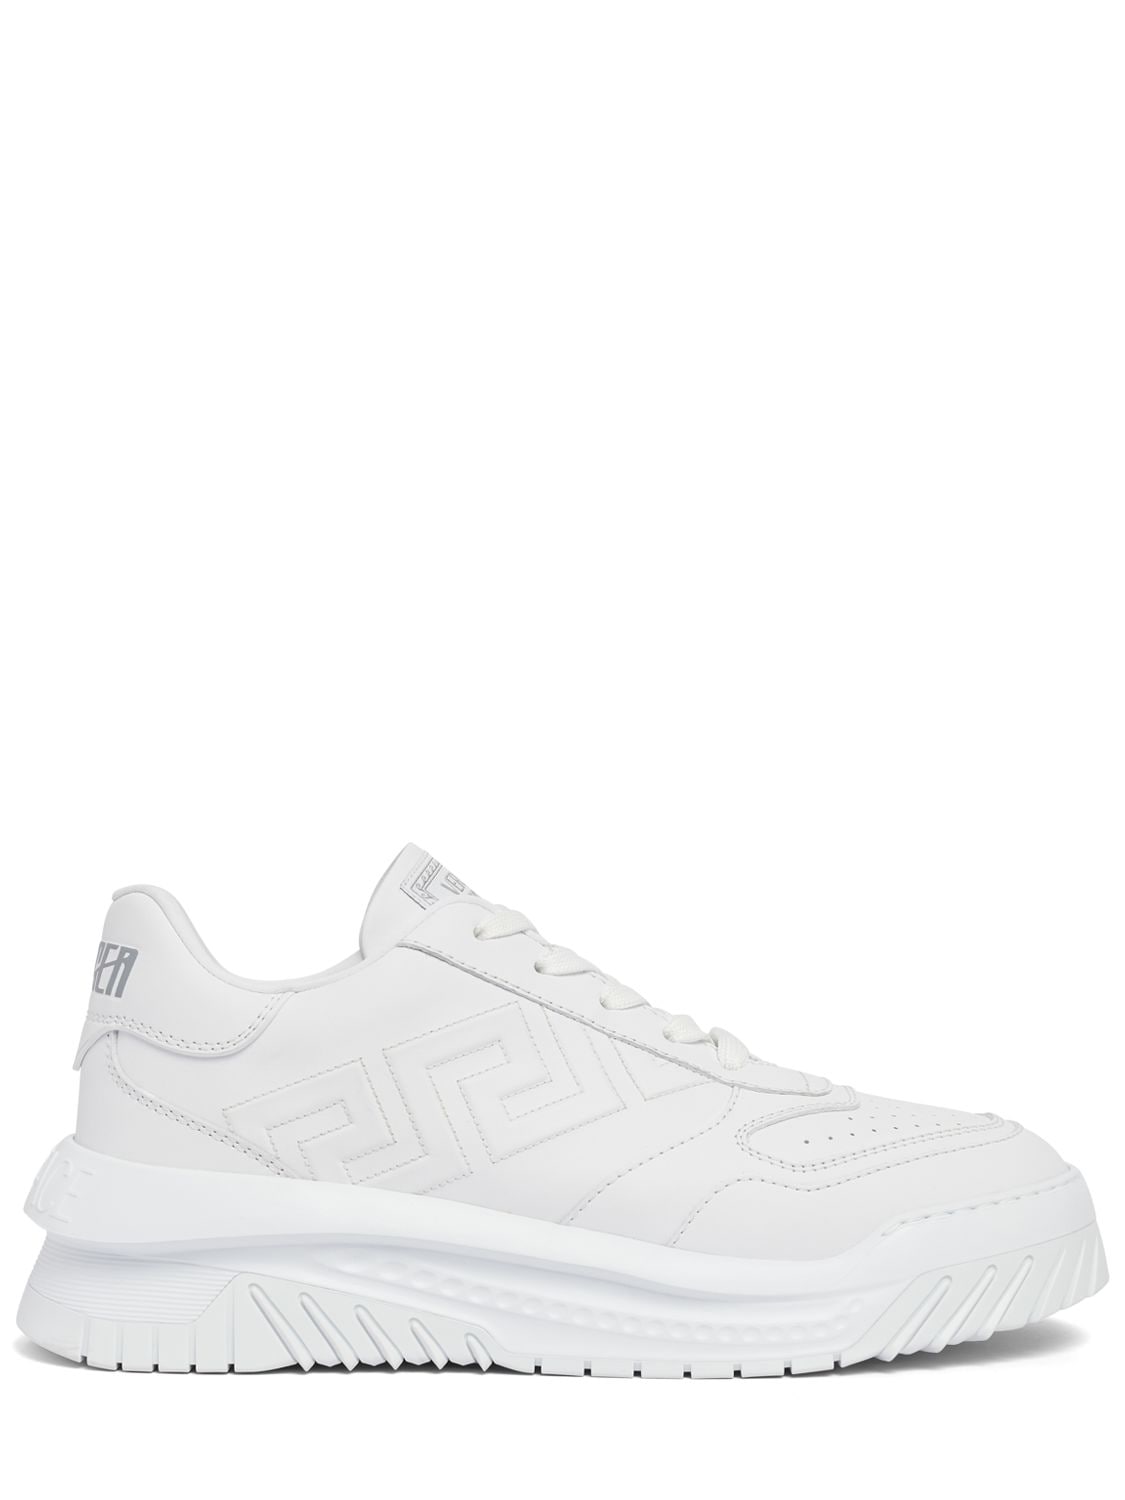 VERSACE Leather Low Top Sneakers